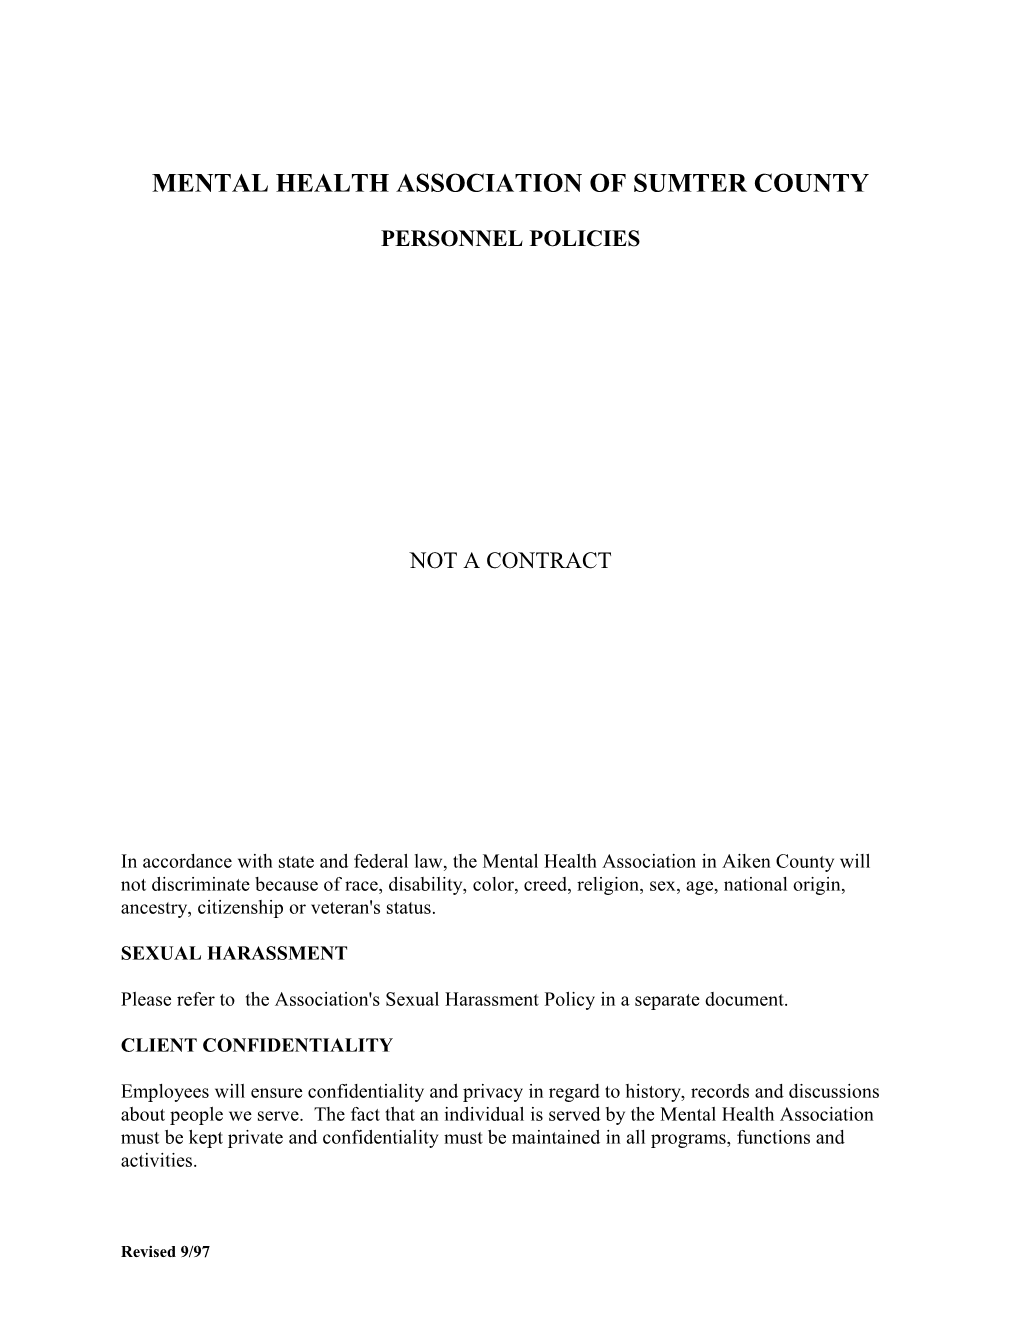 Mental Health Association of Sumter County